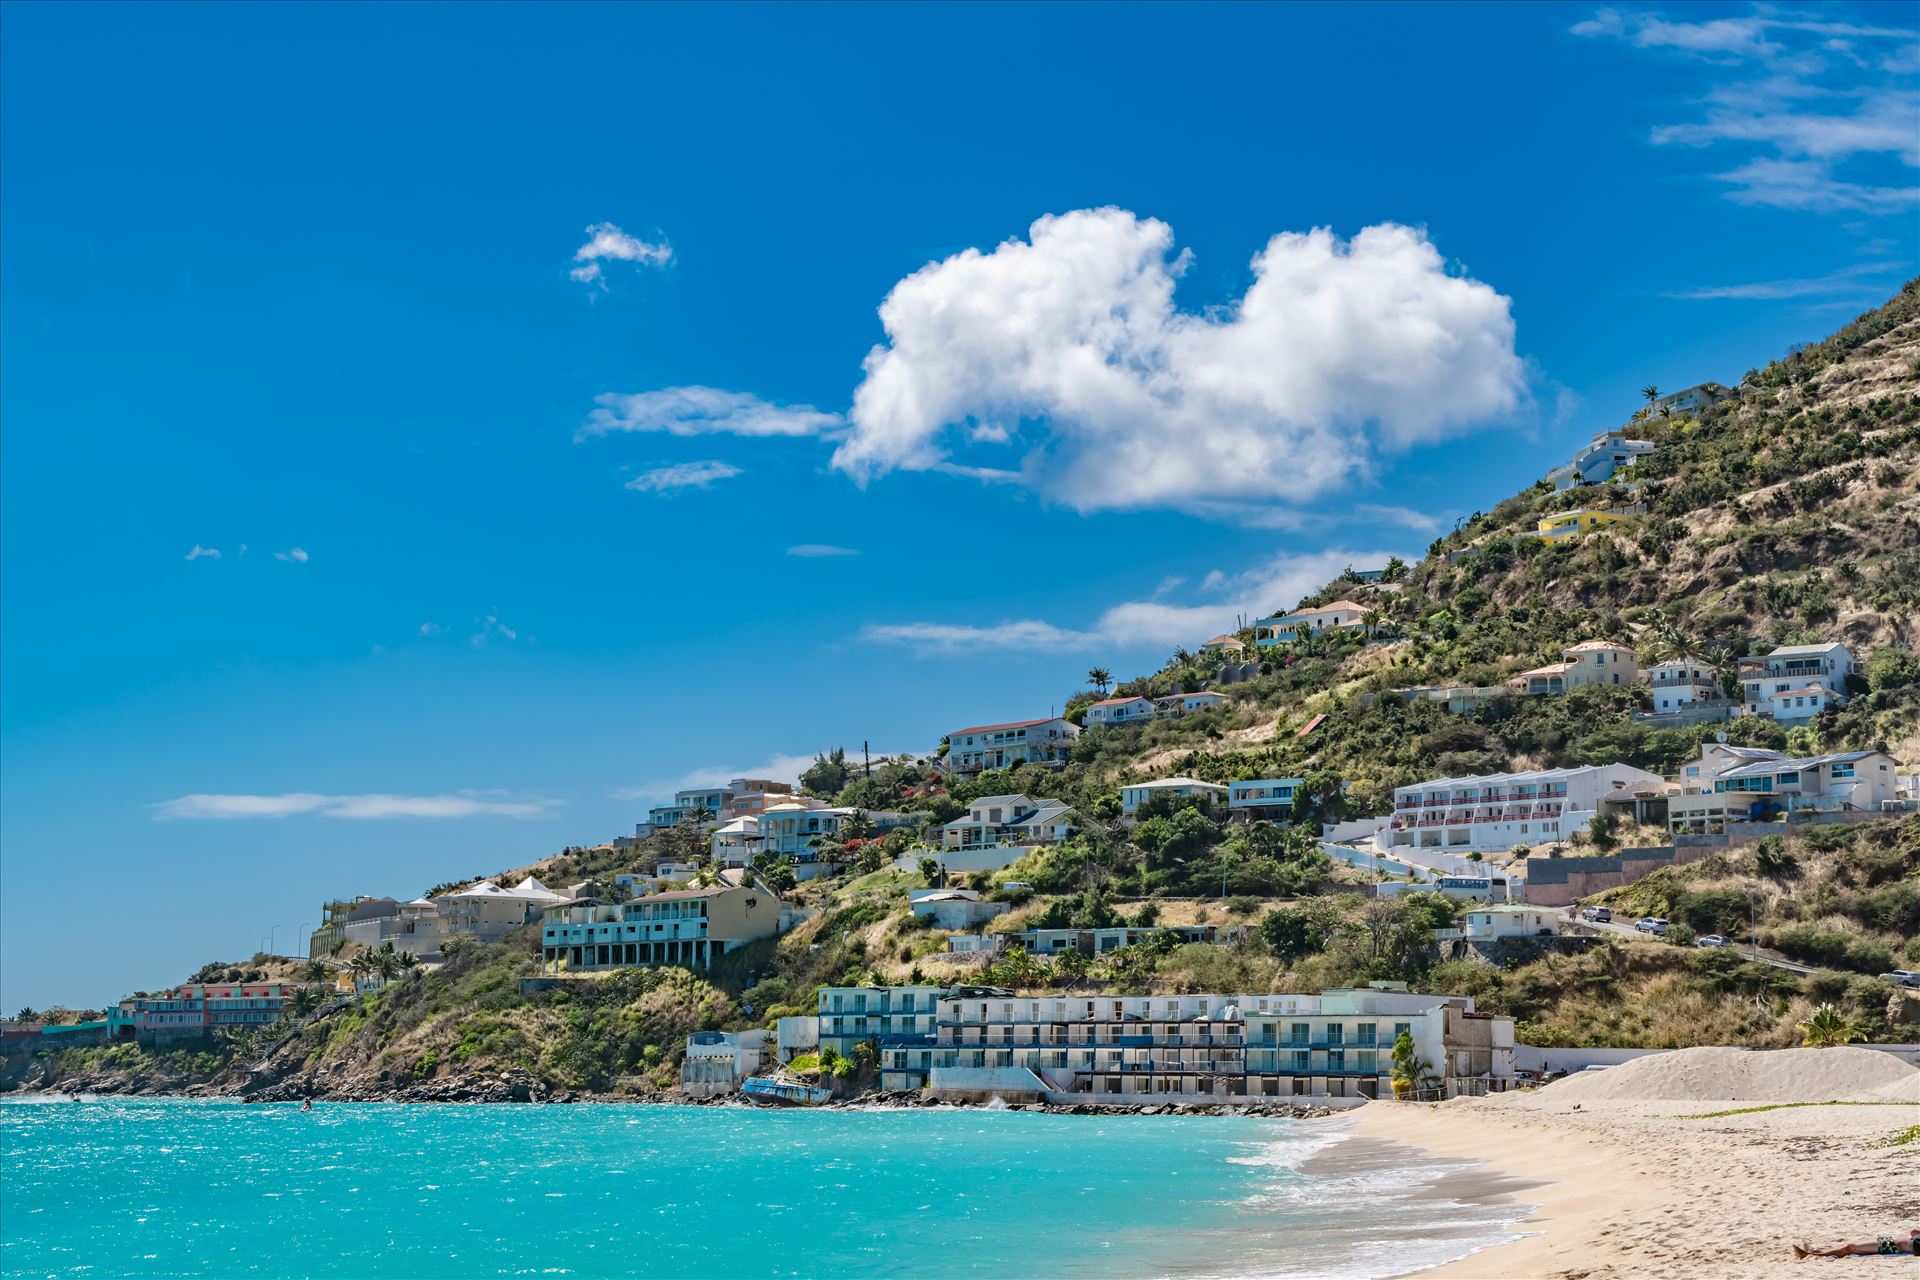 St. Maarten-8506140.jpg  by Terry Kelly Photography